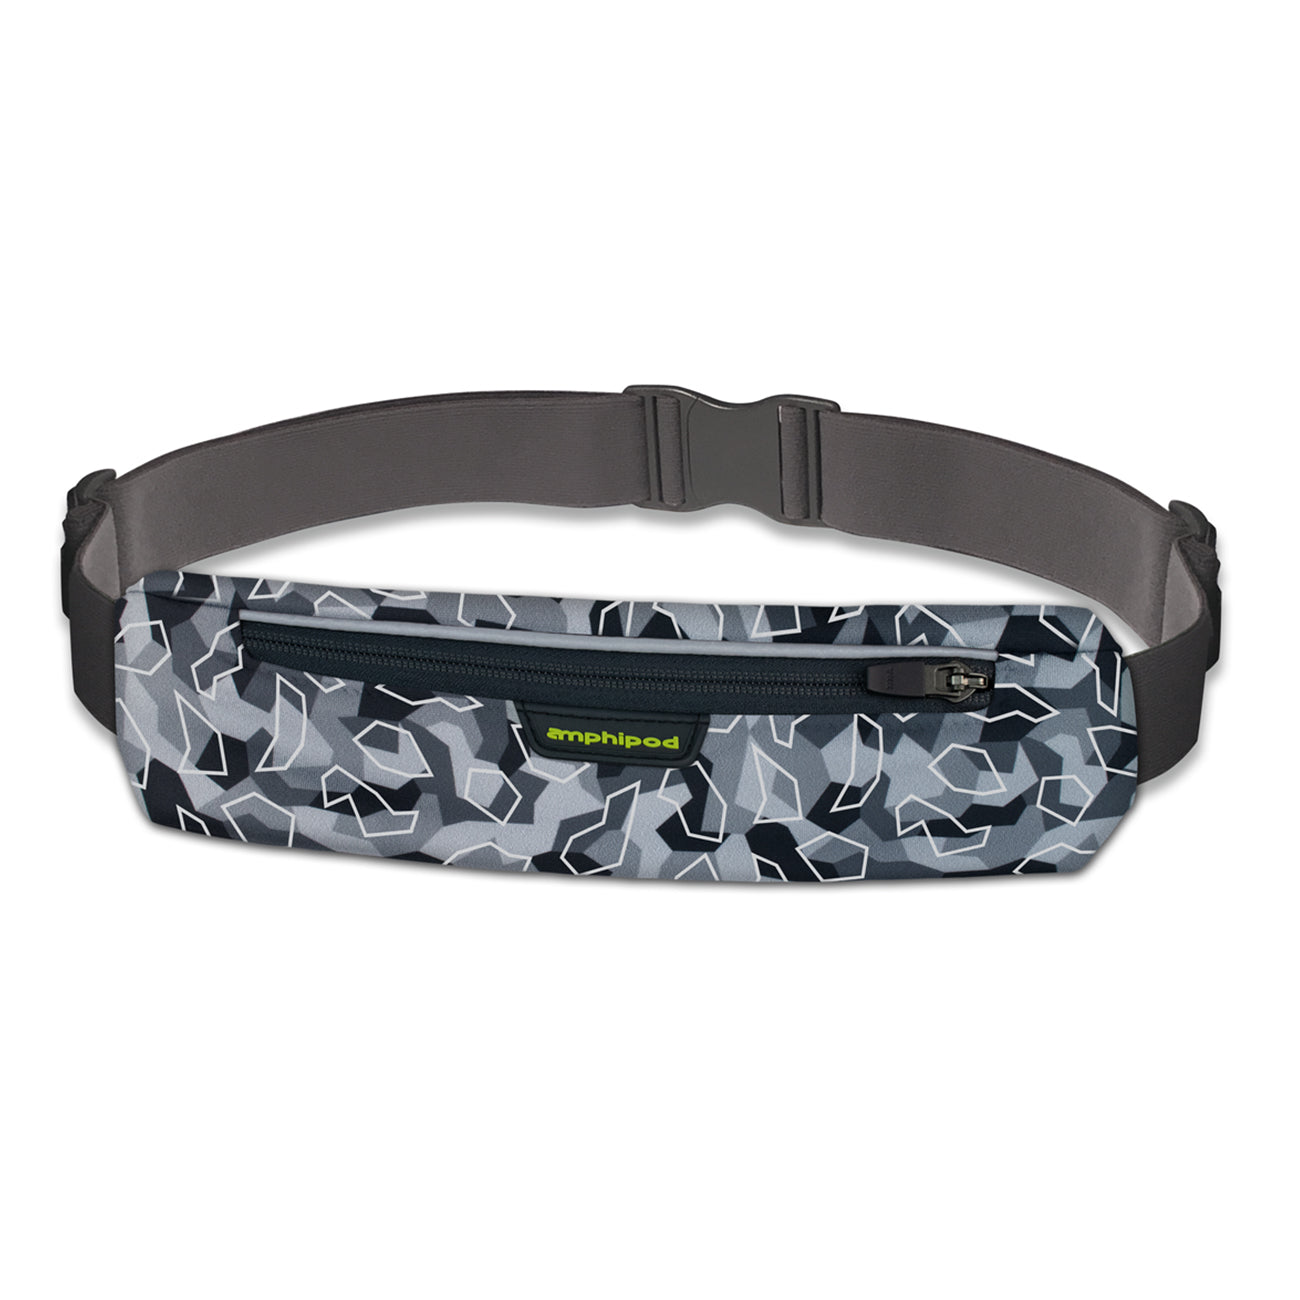 MicroStretch Plus Luxe Reflective Belt - Camo/Reflective